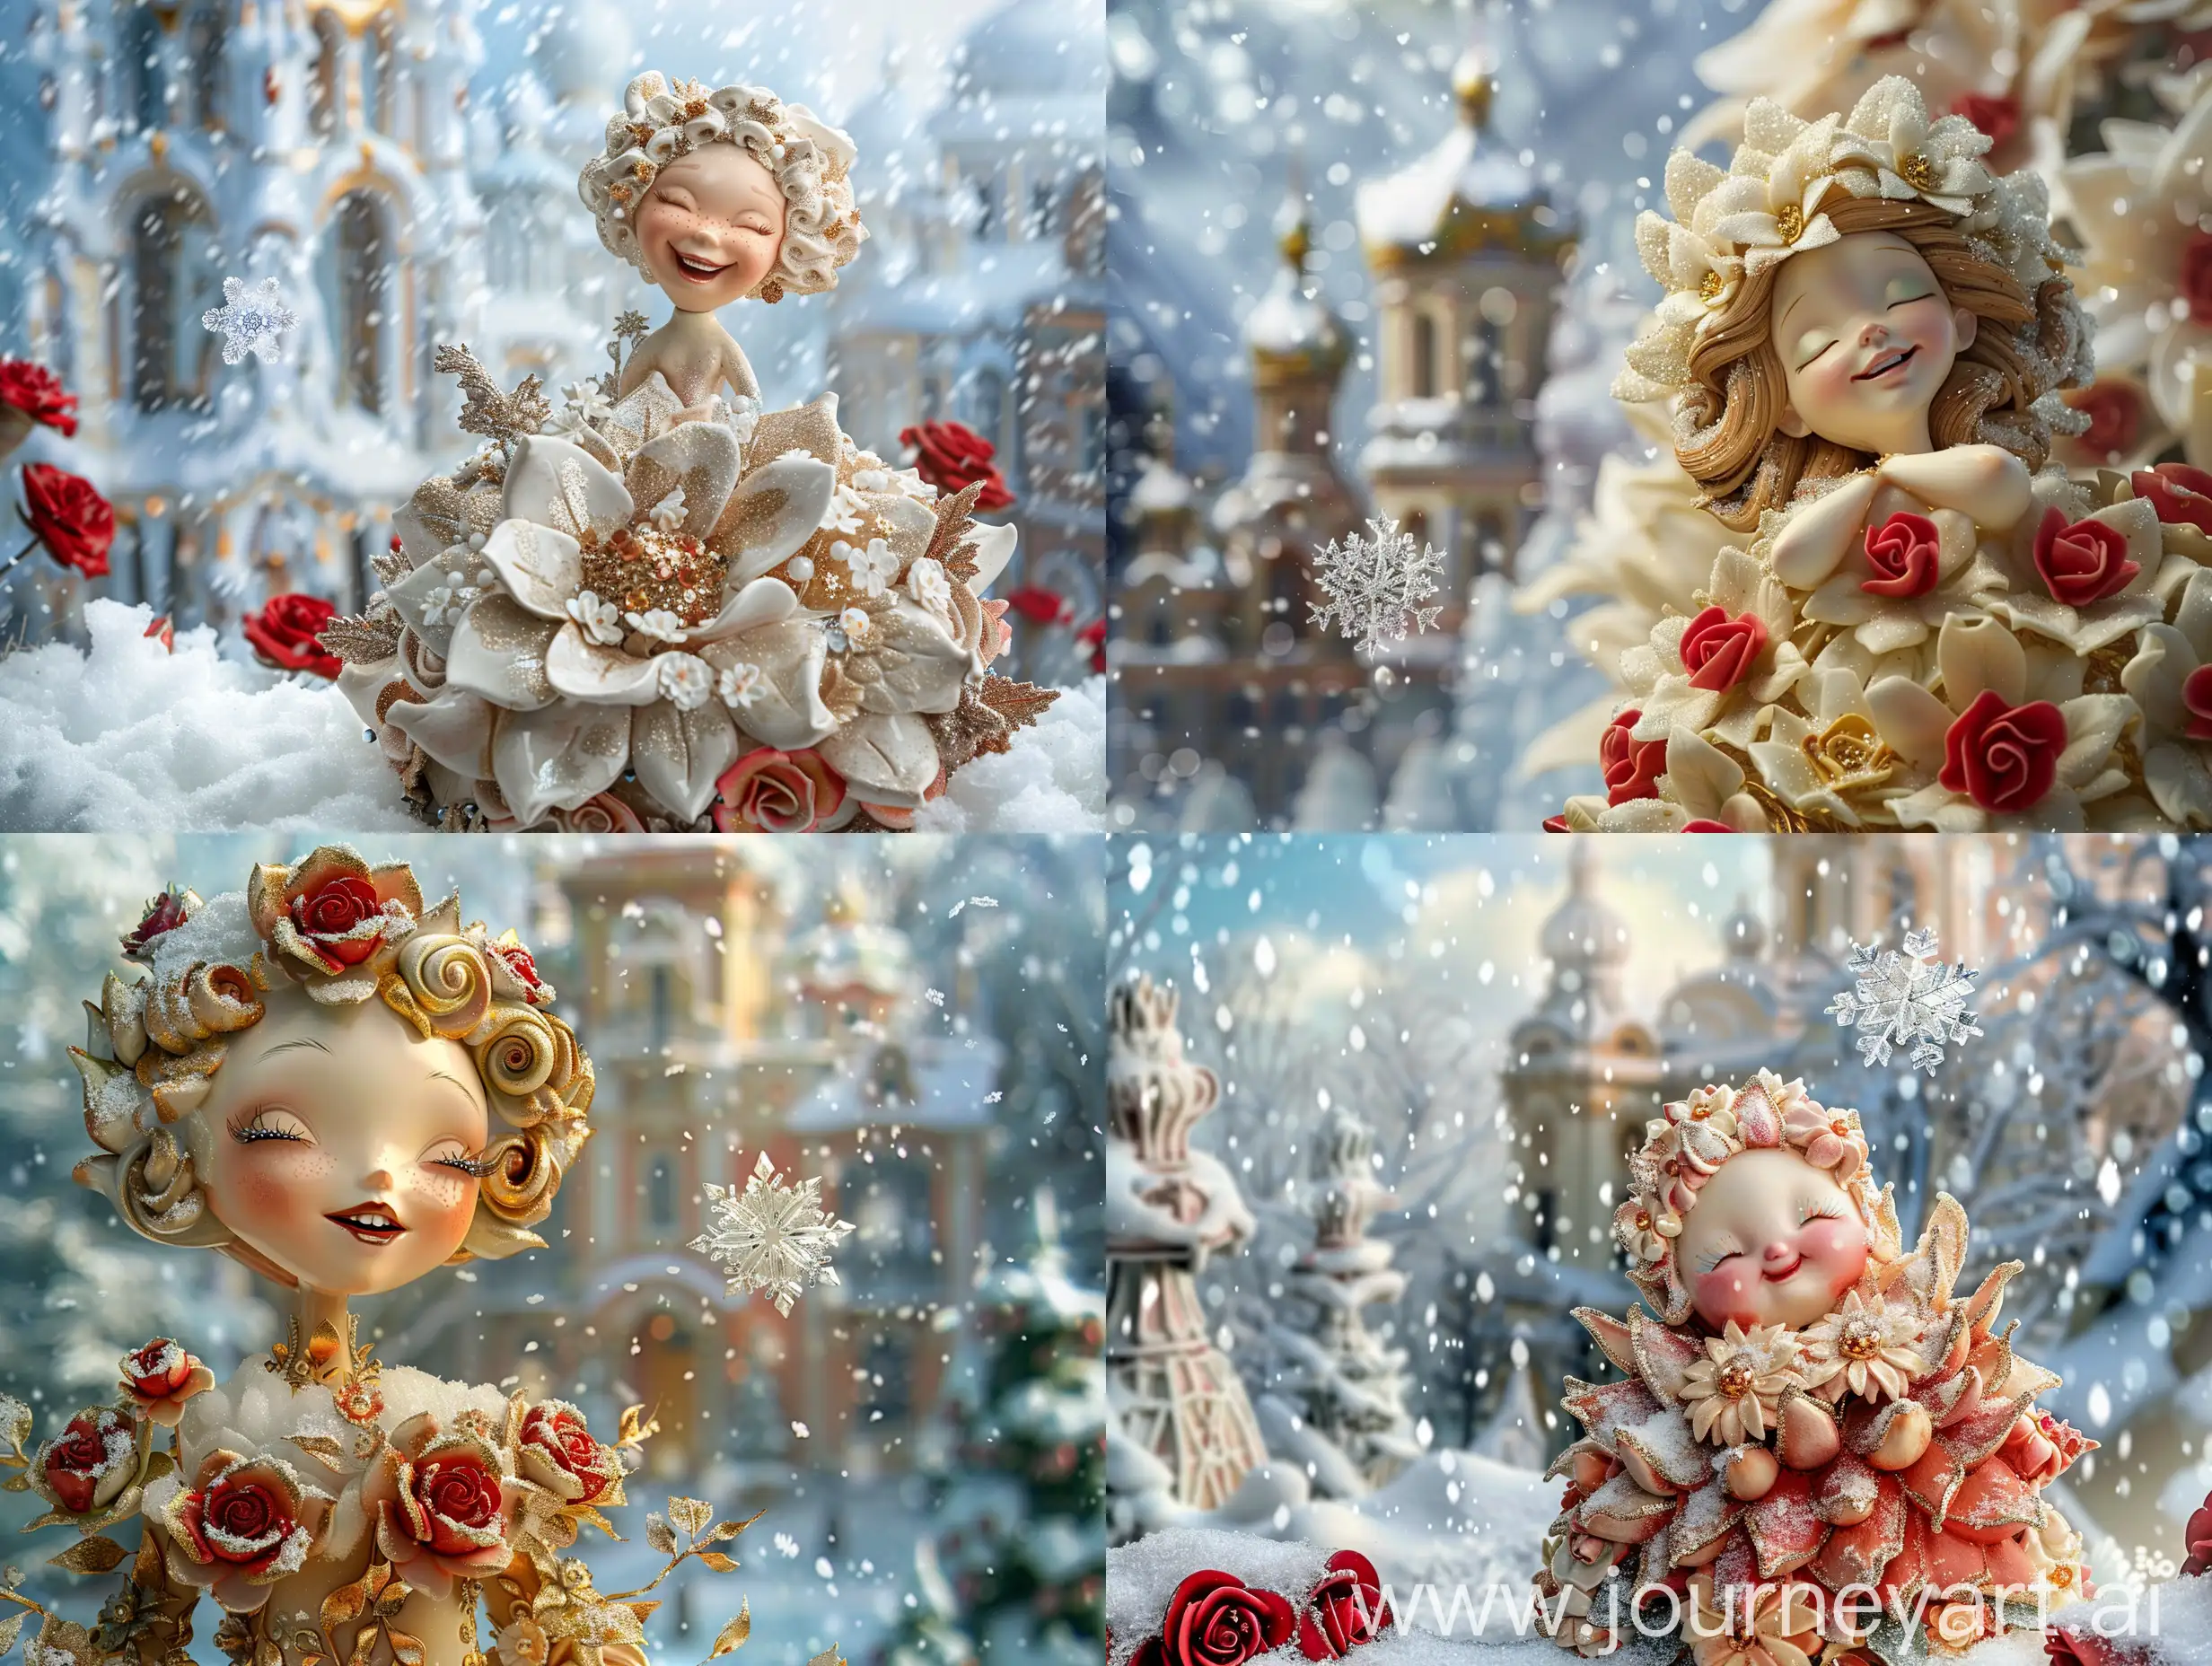 prompt: A ceramic art doll in the shape of a fairy tale, Wearing a gorgeous dress made of flowers, smiling, cute, In the story, a stunning cosmos flower, a delicate snowflake blooming amidst a snowy backdrop, crafted from exquisite crystal glass, Add elements of red roses, a Baroque architecture in the background, in the style of Alfons Mucha. gemstones, and gold in 4K, high-resolution. Express the beauty of the cosmos flower with sculptural delicacy, intricate detailing, and perfect symmetry in its petals, capturing its surreal, extremely beautiful, and intricately detailed essence. Emphasize its sharp clarity, sparkling brilliance, vibrant richness, precision, and captivating elegance, evoking a serene yet opulent ambiance amidst falling snow.

